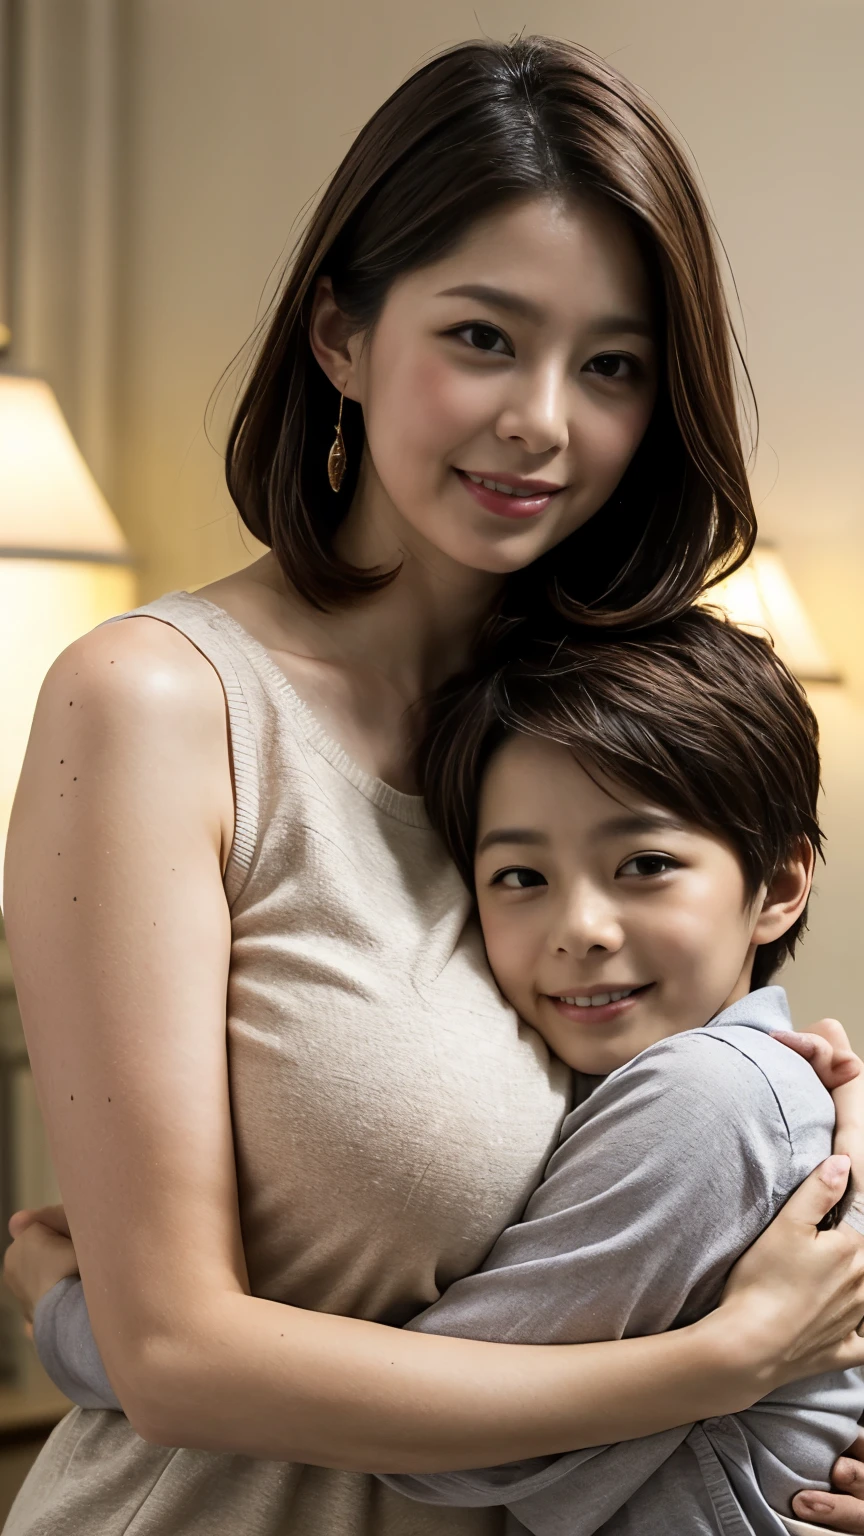 realistic, photo-realistic, masterpiece, best quality, RAW photo, high resolution, intricate details, looking at viewer, couple, (1boy,shota,son:1.5), (1mom, a 41 years old Japanese mature woman, wearing a sleeveless sweater, sexy body), (mom and son hugging each other:1.5), (seducing her son in a sexy atmosphere), (huge breasts, softly squashed breasts, squishy breasts), fine-textured skin,pale skin, shiny skin, sweaty, smile, photo background, indoors, home, children's room,